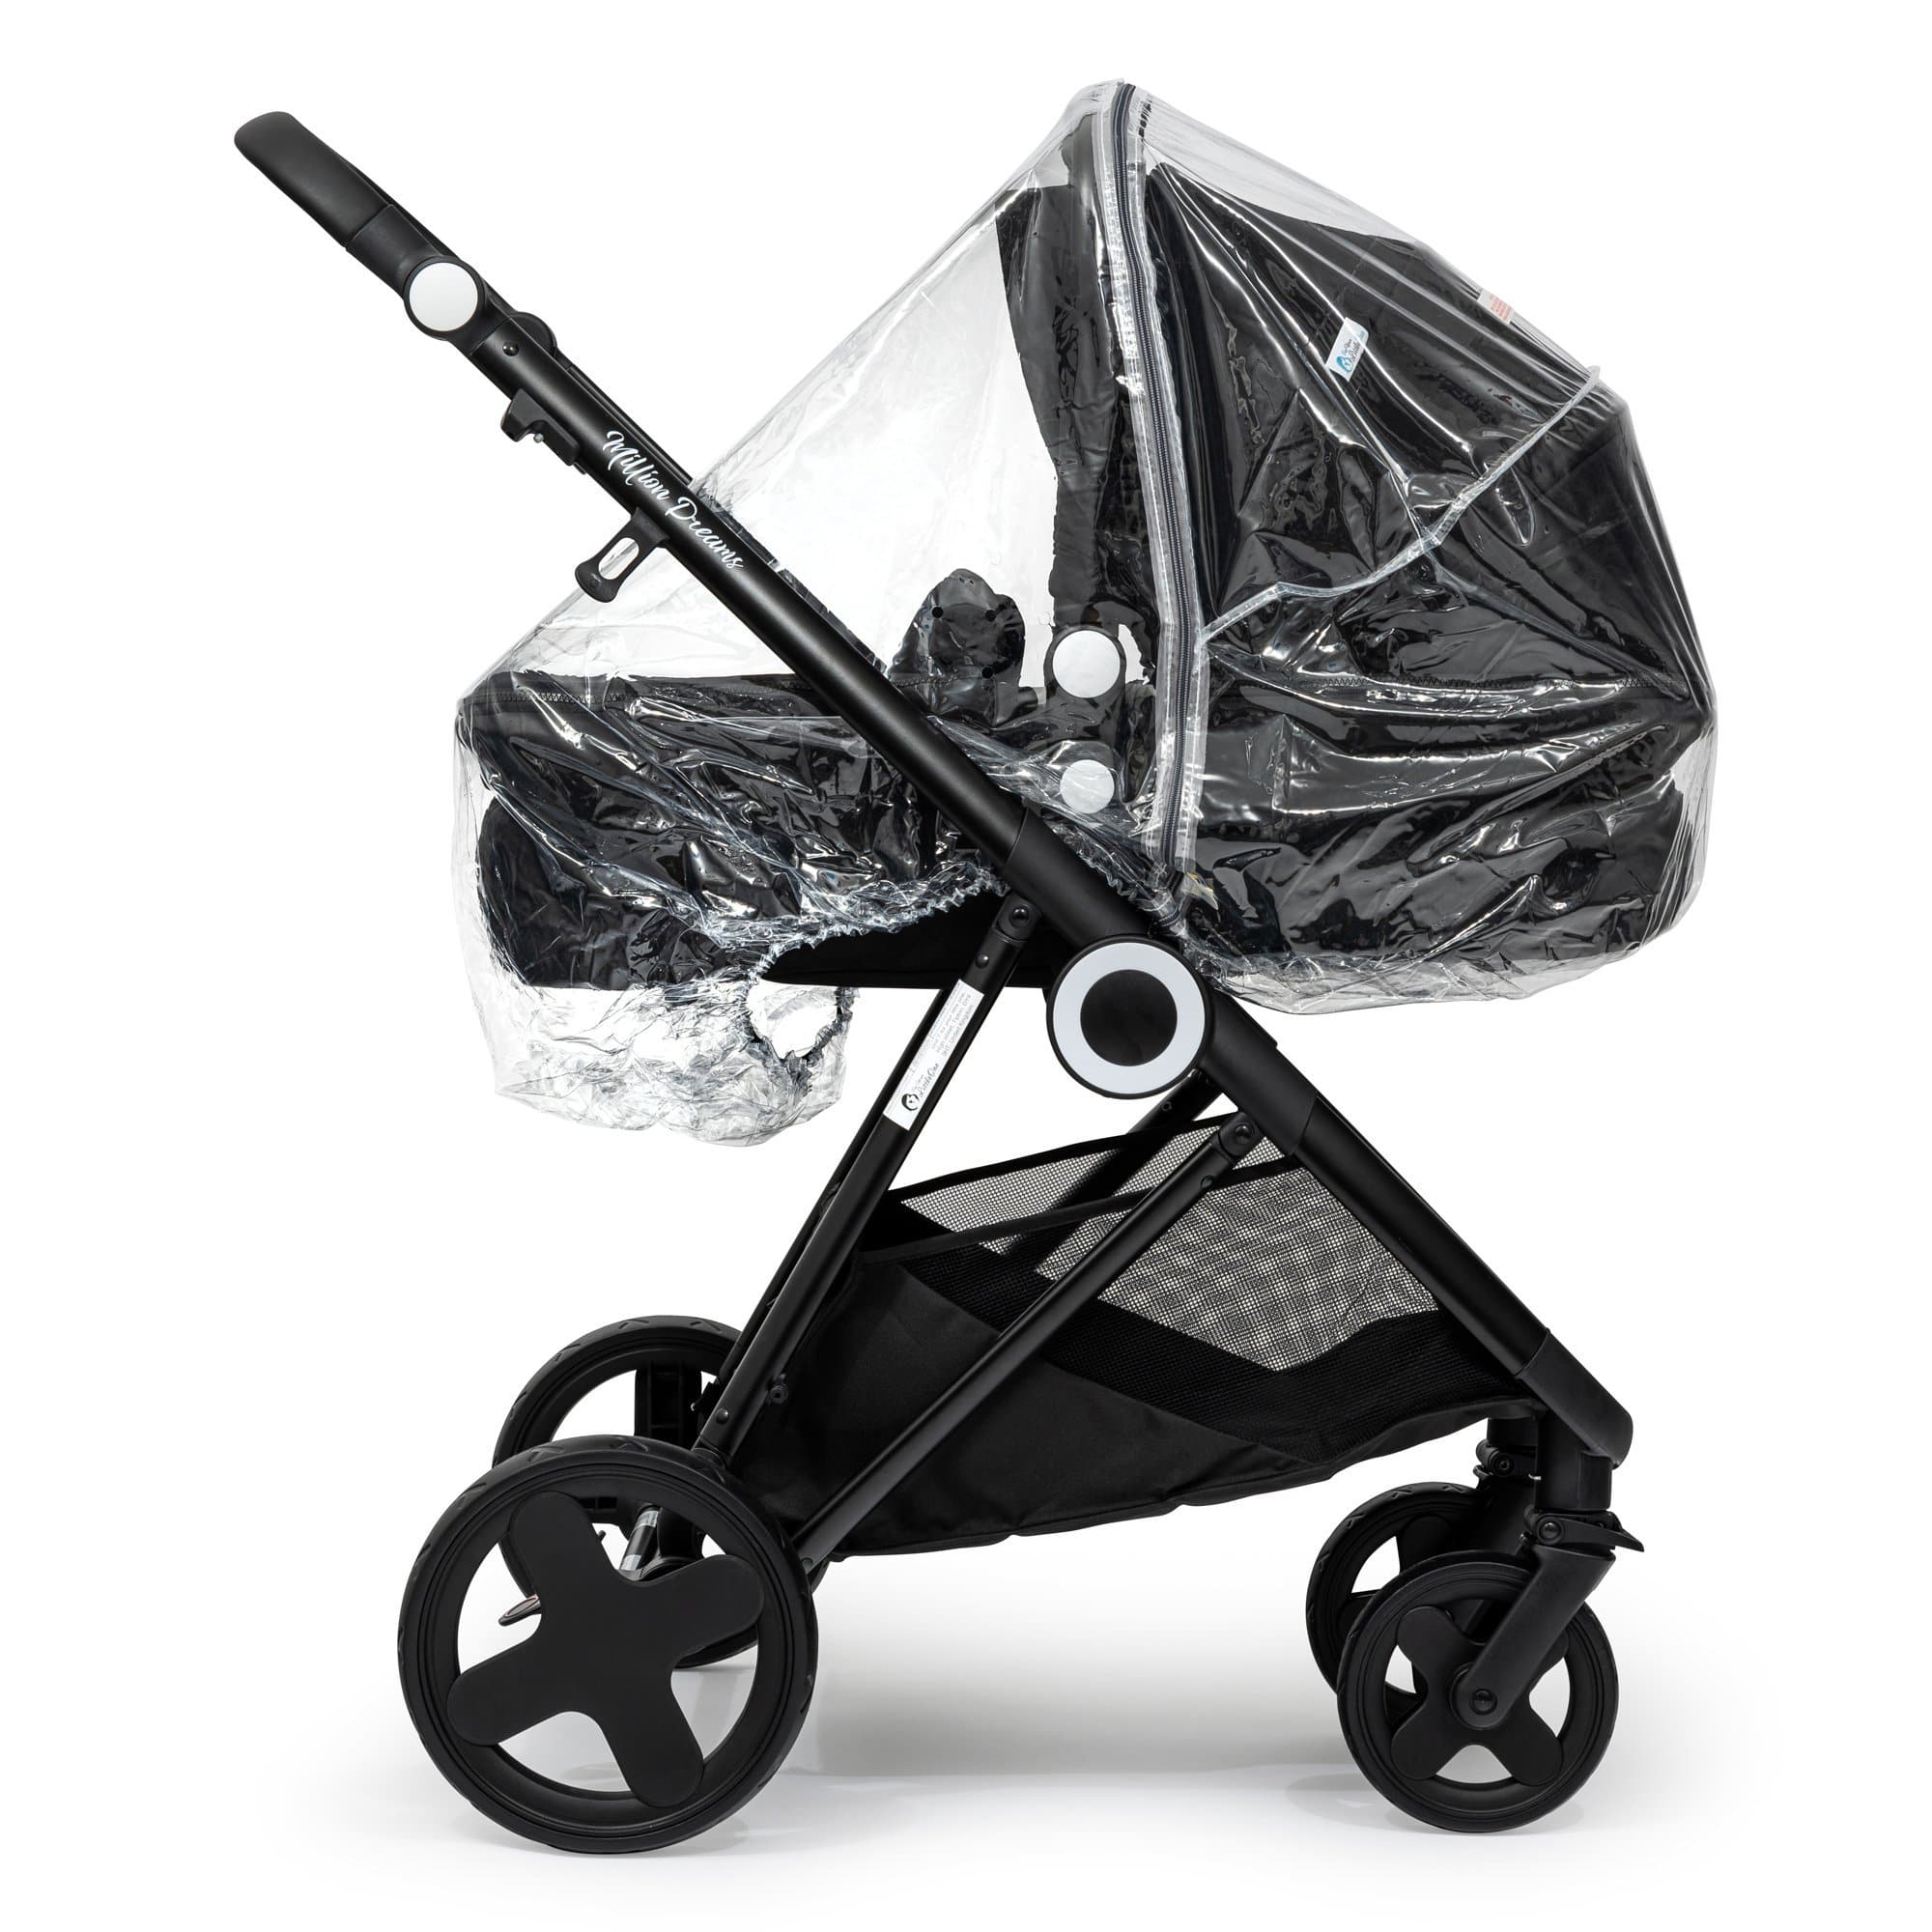 2 in 1 Rain Cover Compatible with Safety 1st - Fits All Models - For Your Little One